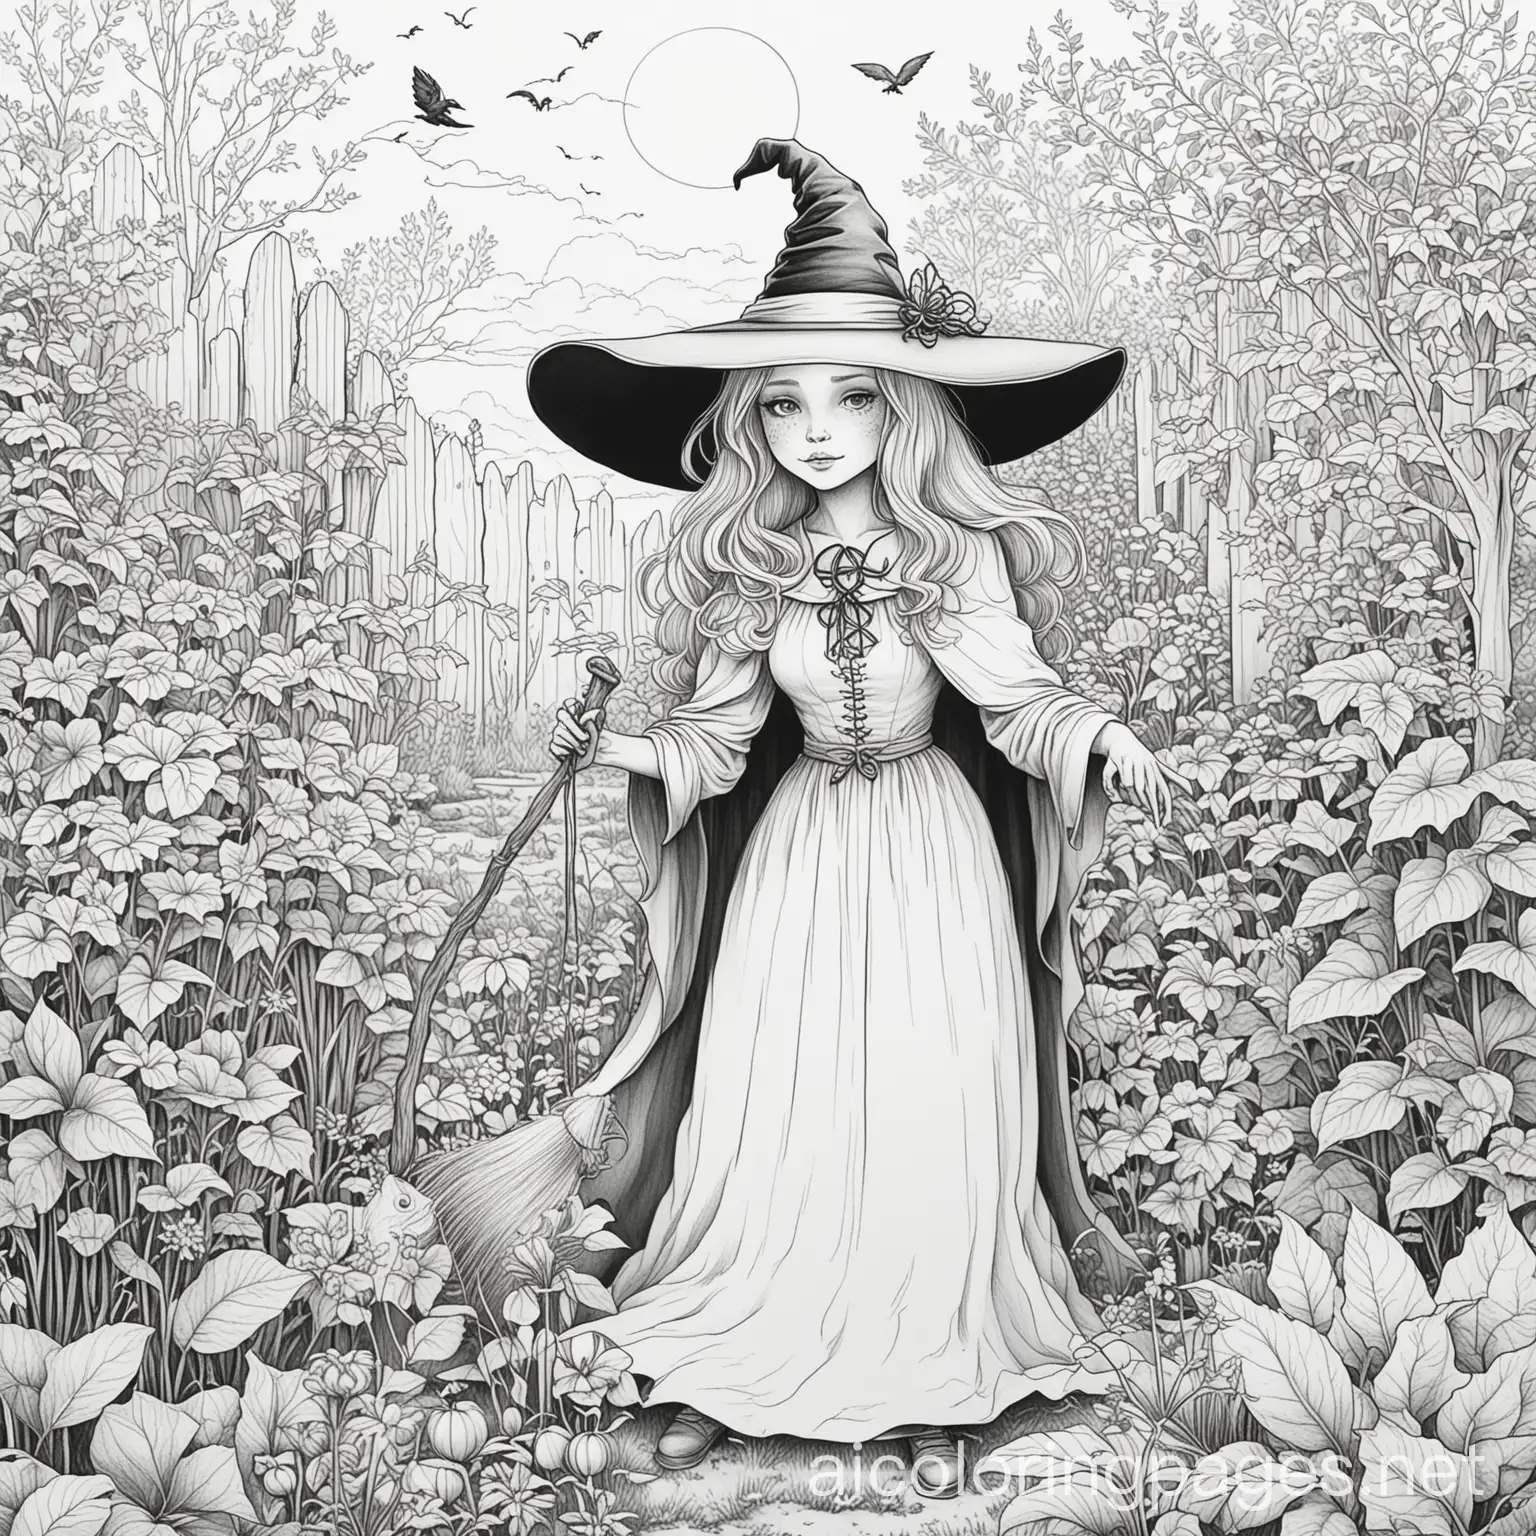 witch in a garden, Coloring Page, black and white, line art, white background, Simplicity, Ample White Space. The background of the coloring page is plain white to make it easy for young children to color within the lines. The outlines of all the subjects are easy to distinguish, making it simple for kids to color without too much difficulty